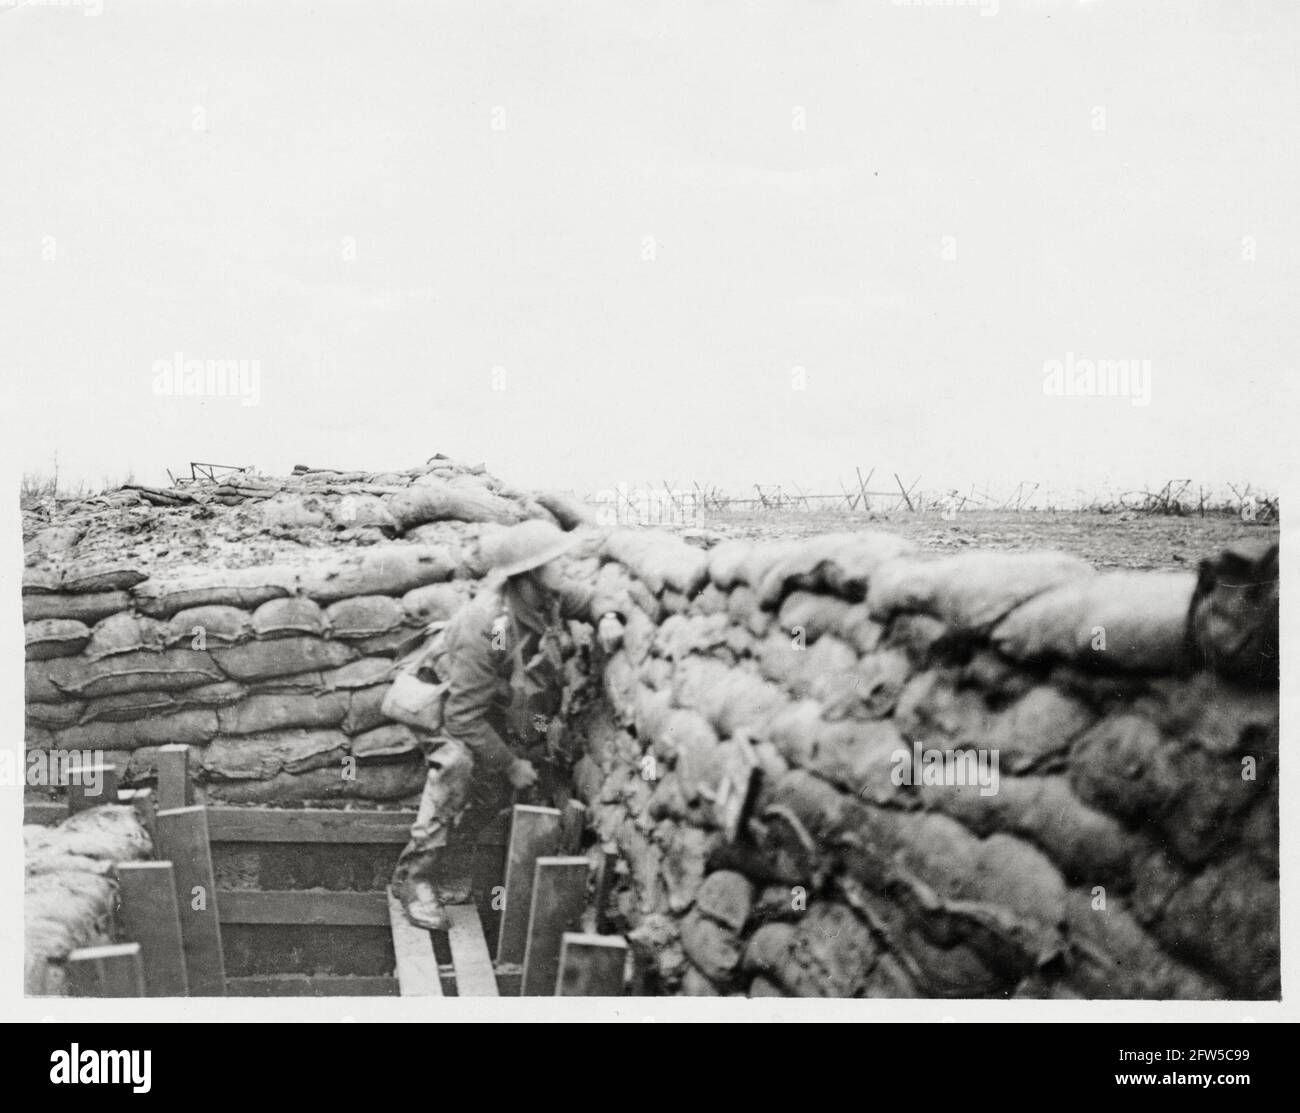 World War One, WWI, Western Front - A Look-out in a front line trench with barbed wire in No Man's Land, France Stock Photo